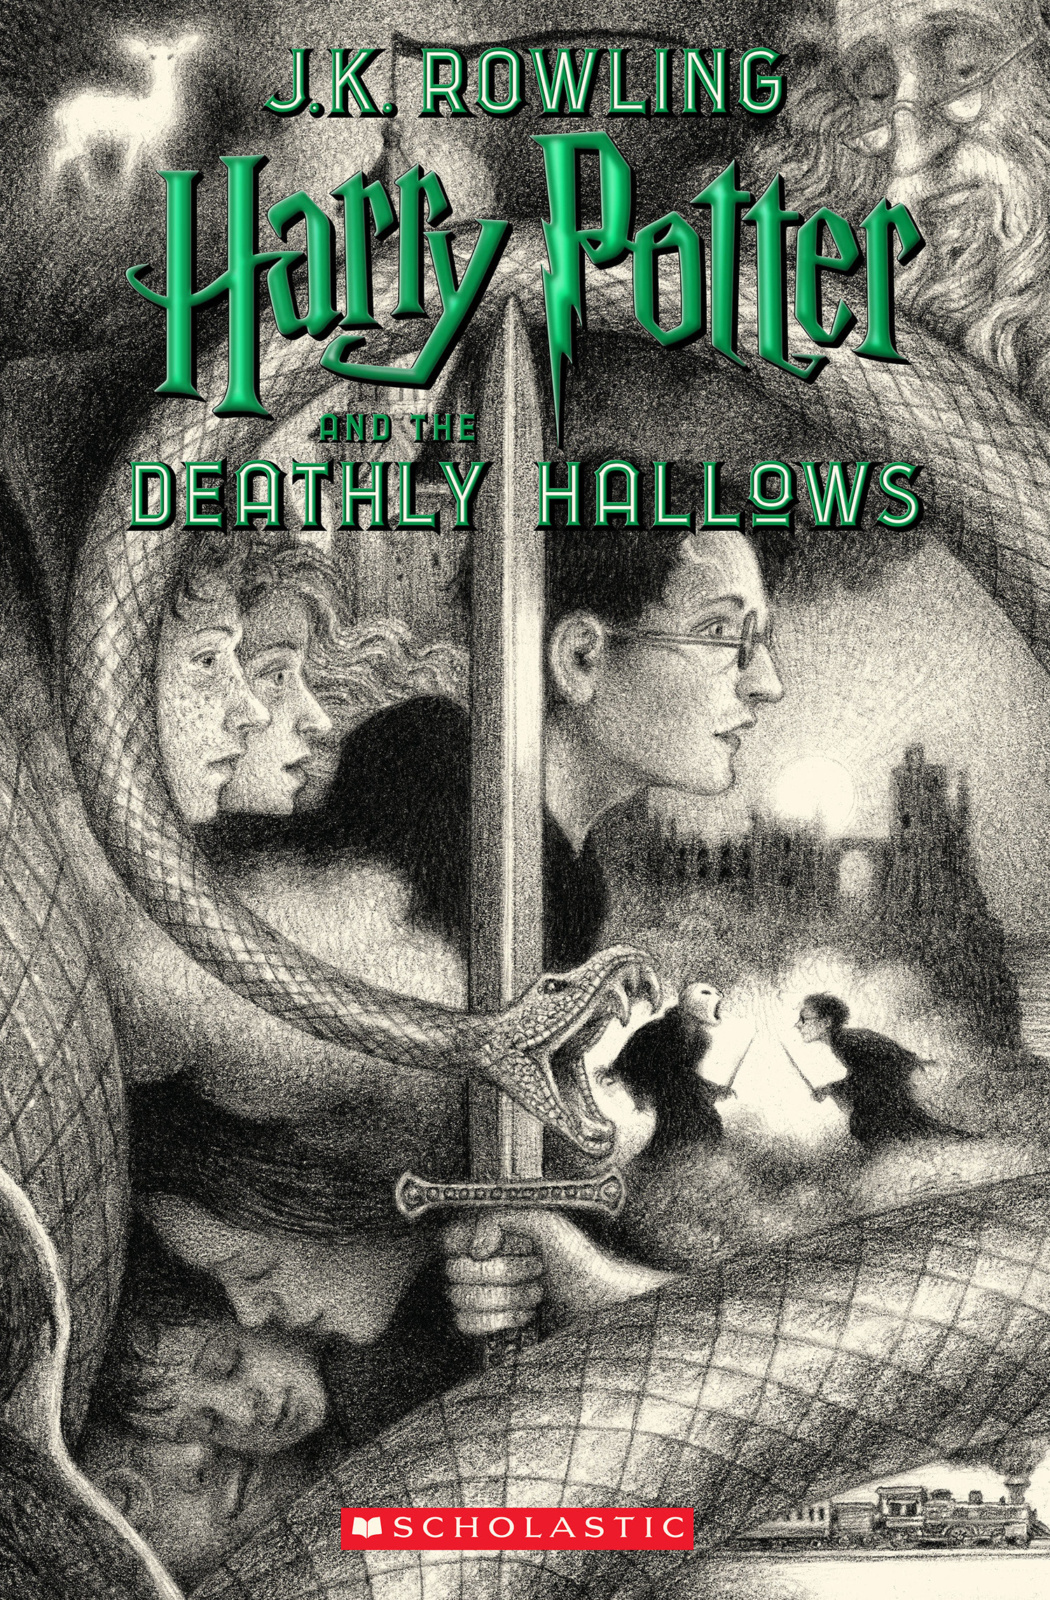 harry potter and the deathly hallows audiobook chapther 7